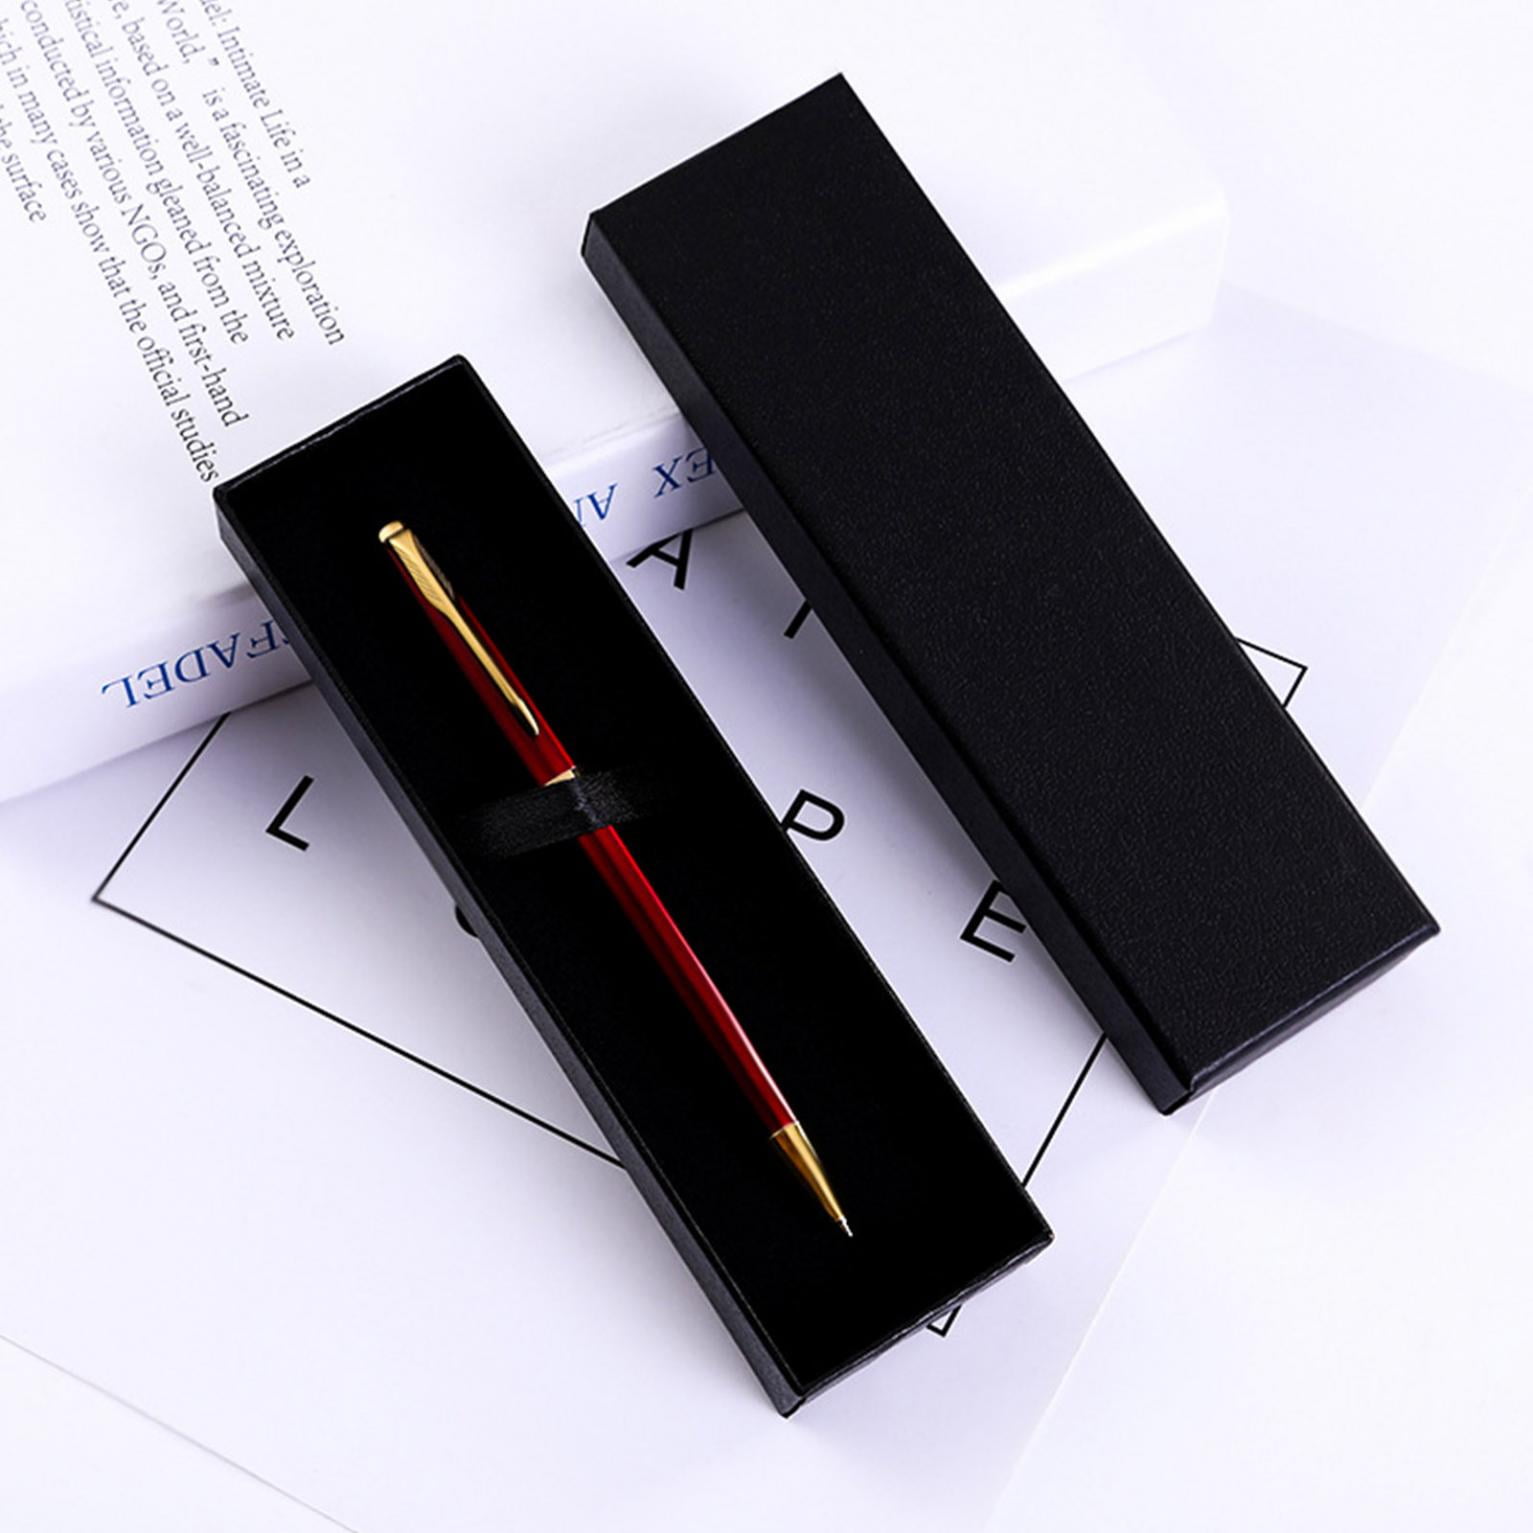 BEILUNER Luxury Walnut Ballpoint Pen Writing Set - Elegant Fancy Nice Gift Pen Set for Signature Executive Business Office Supplies - Gift Boxed